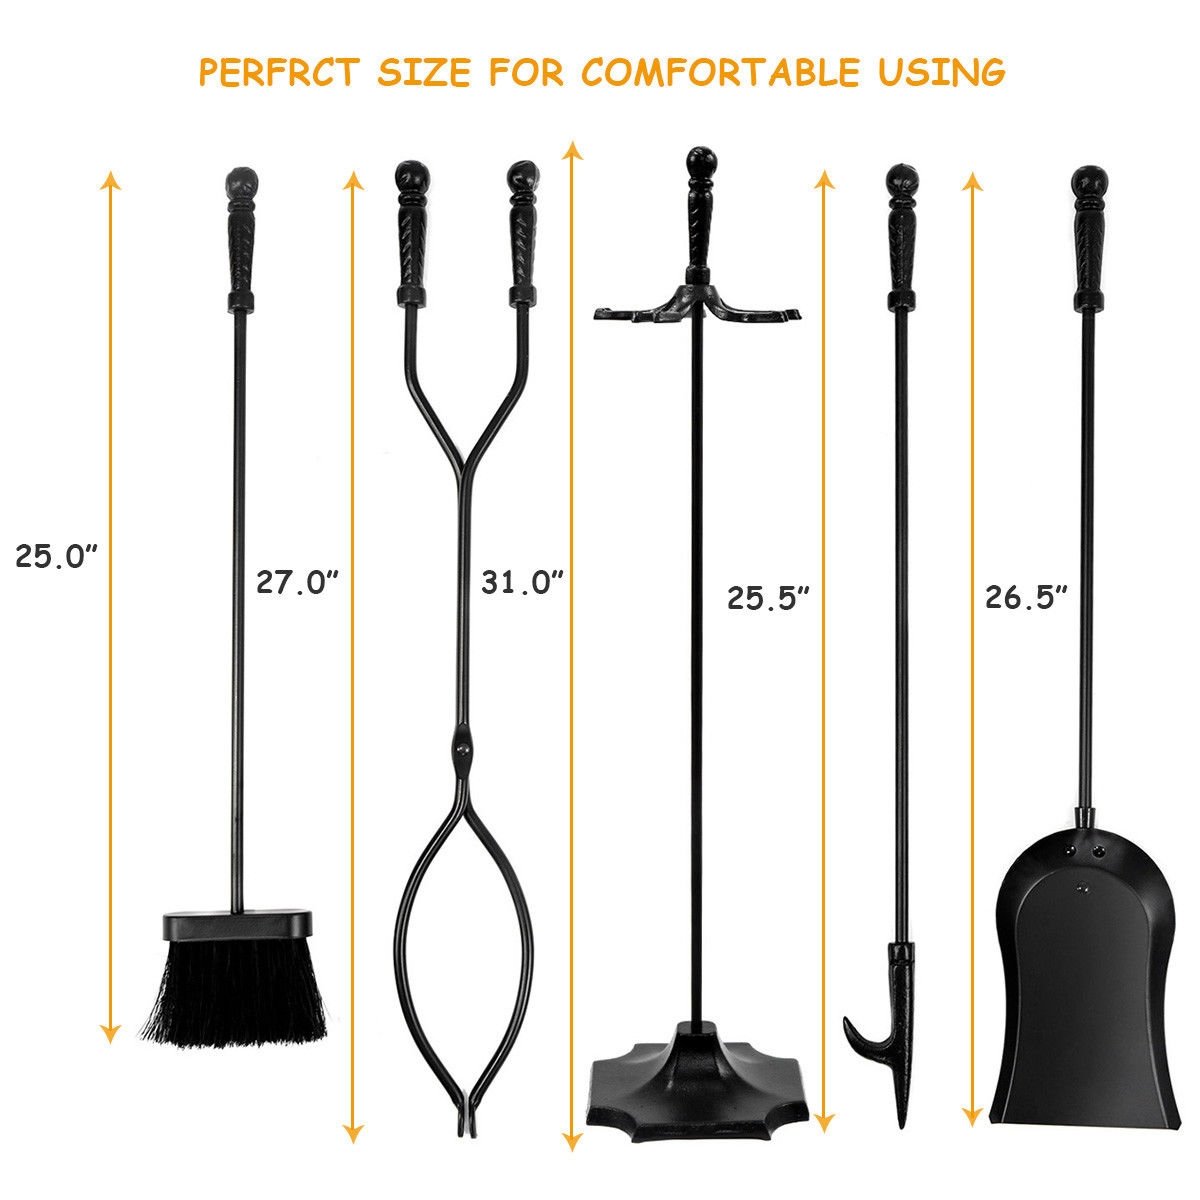 31 Inch 5 Pieces Hearth Fireplace Fire Tools Set, Black